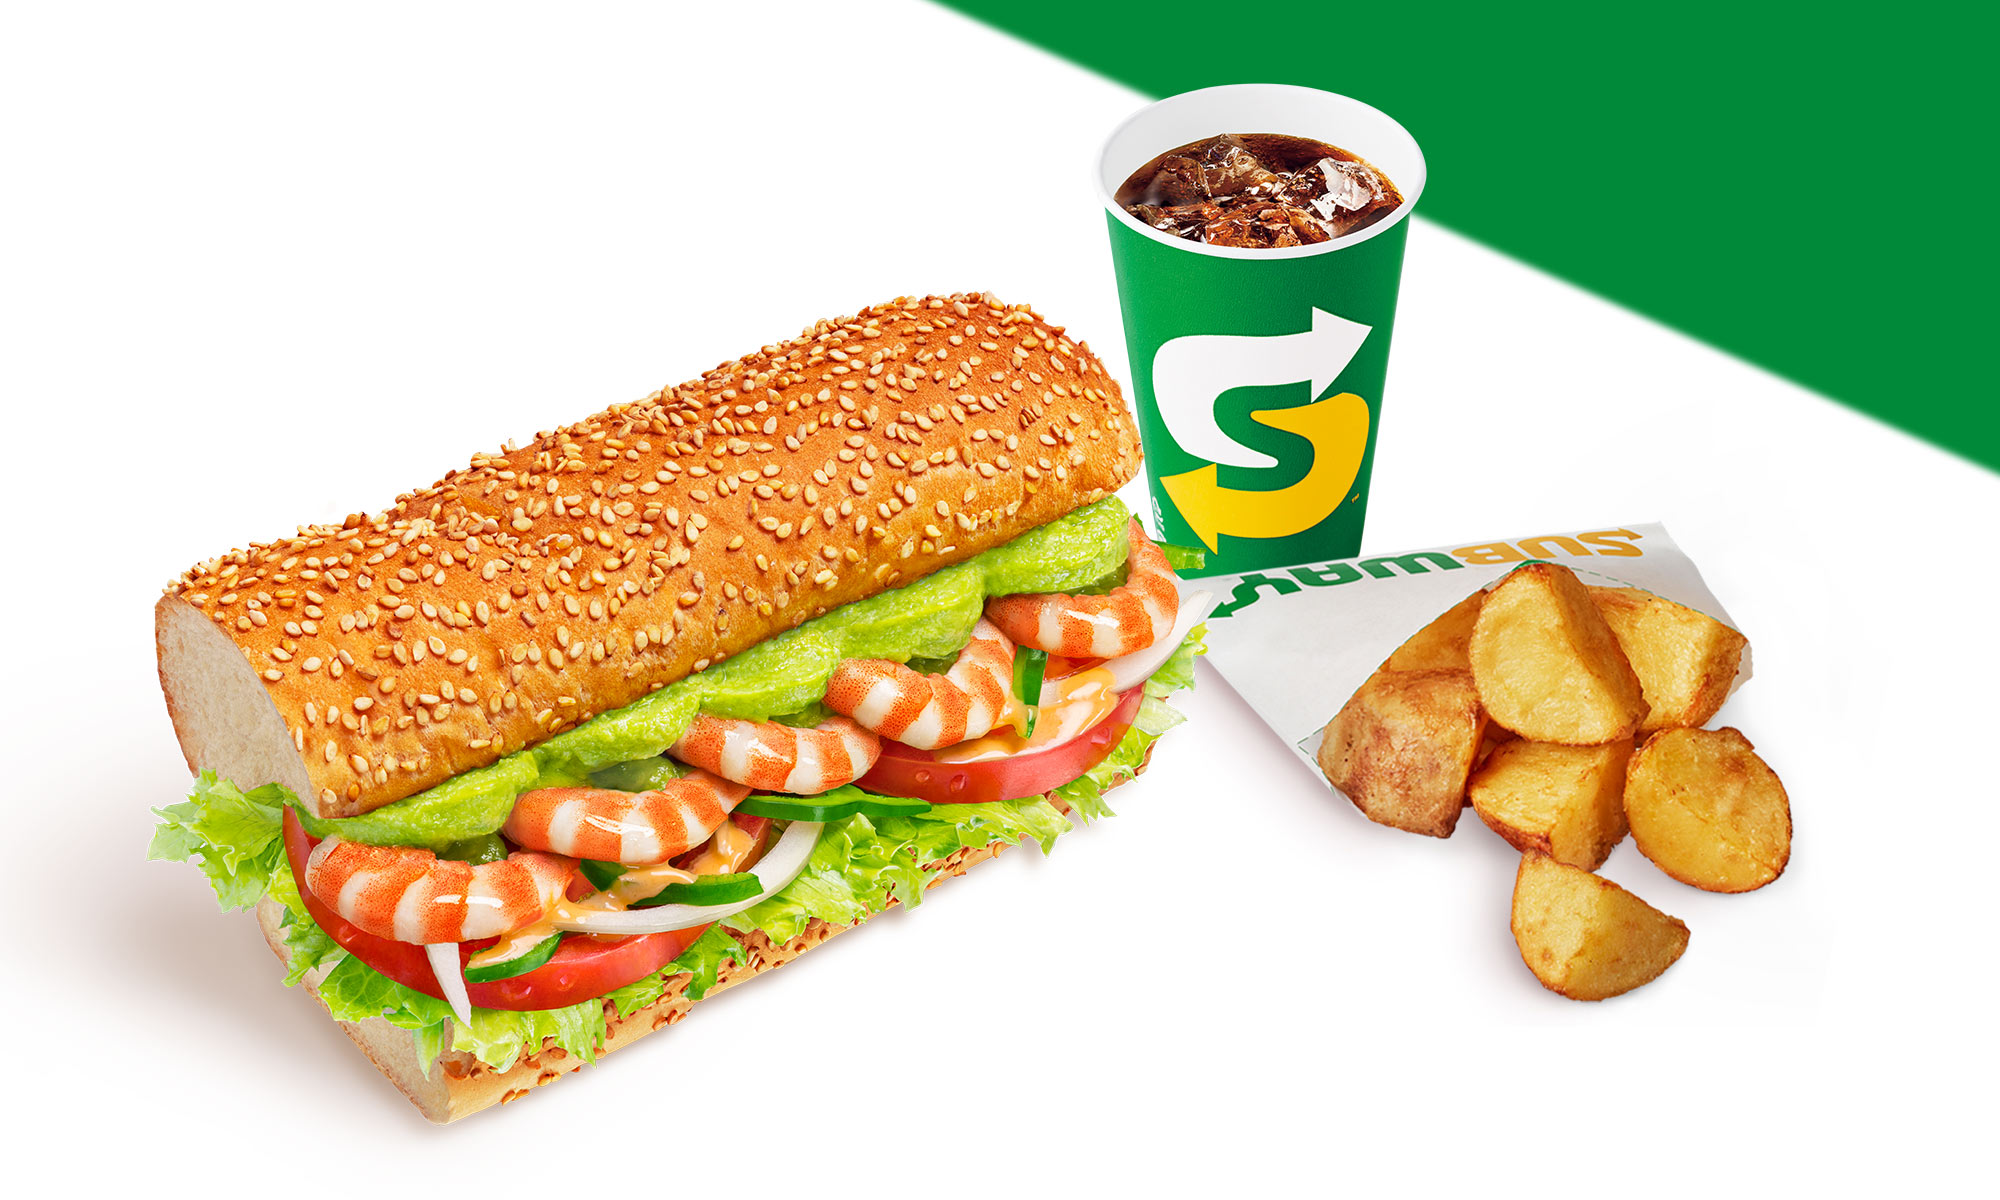 Photo of SUBWAY's recommended product